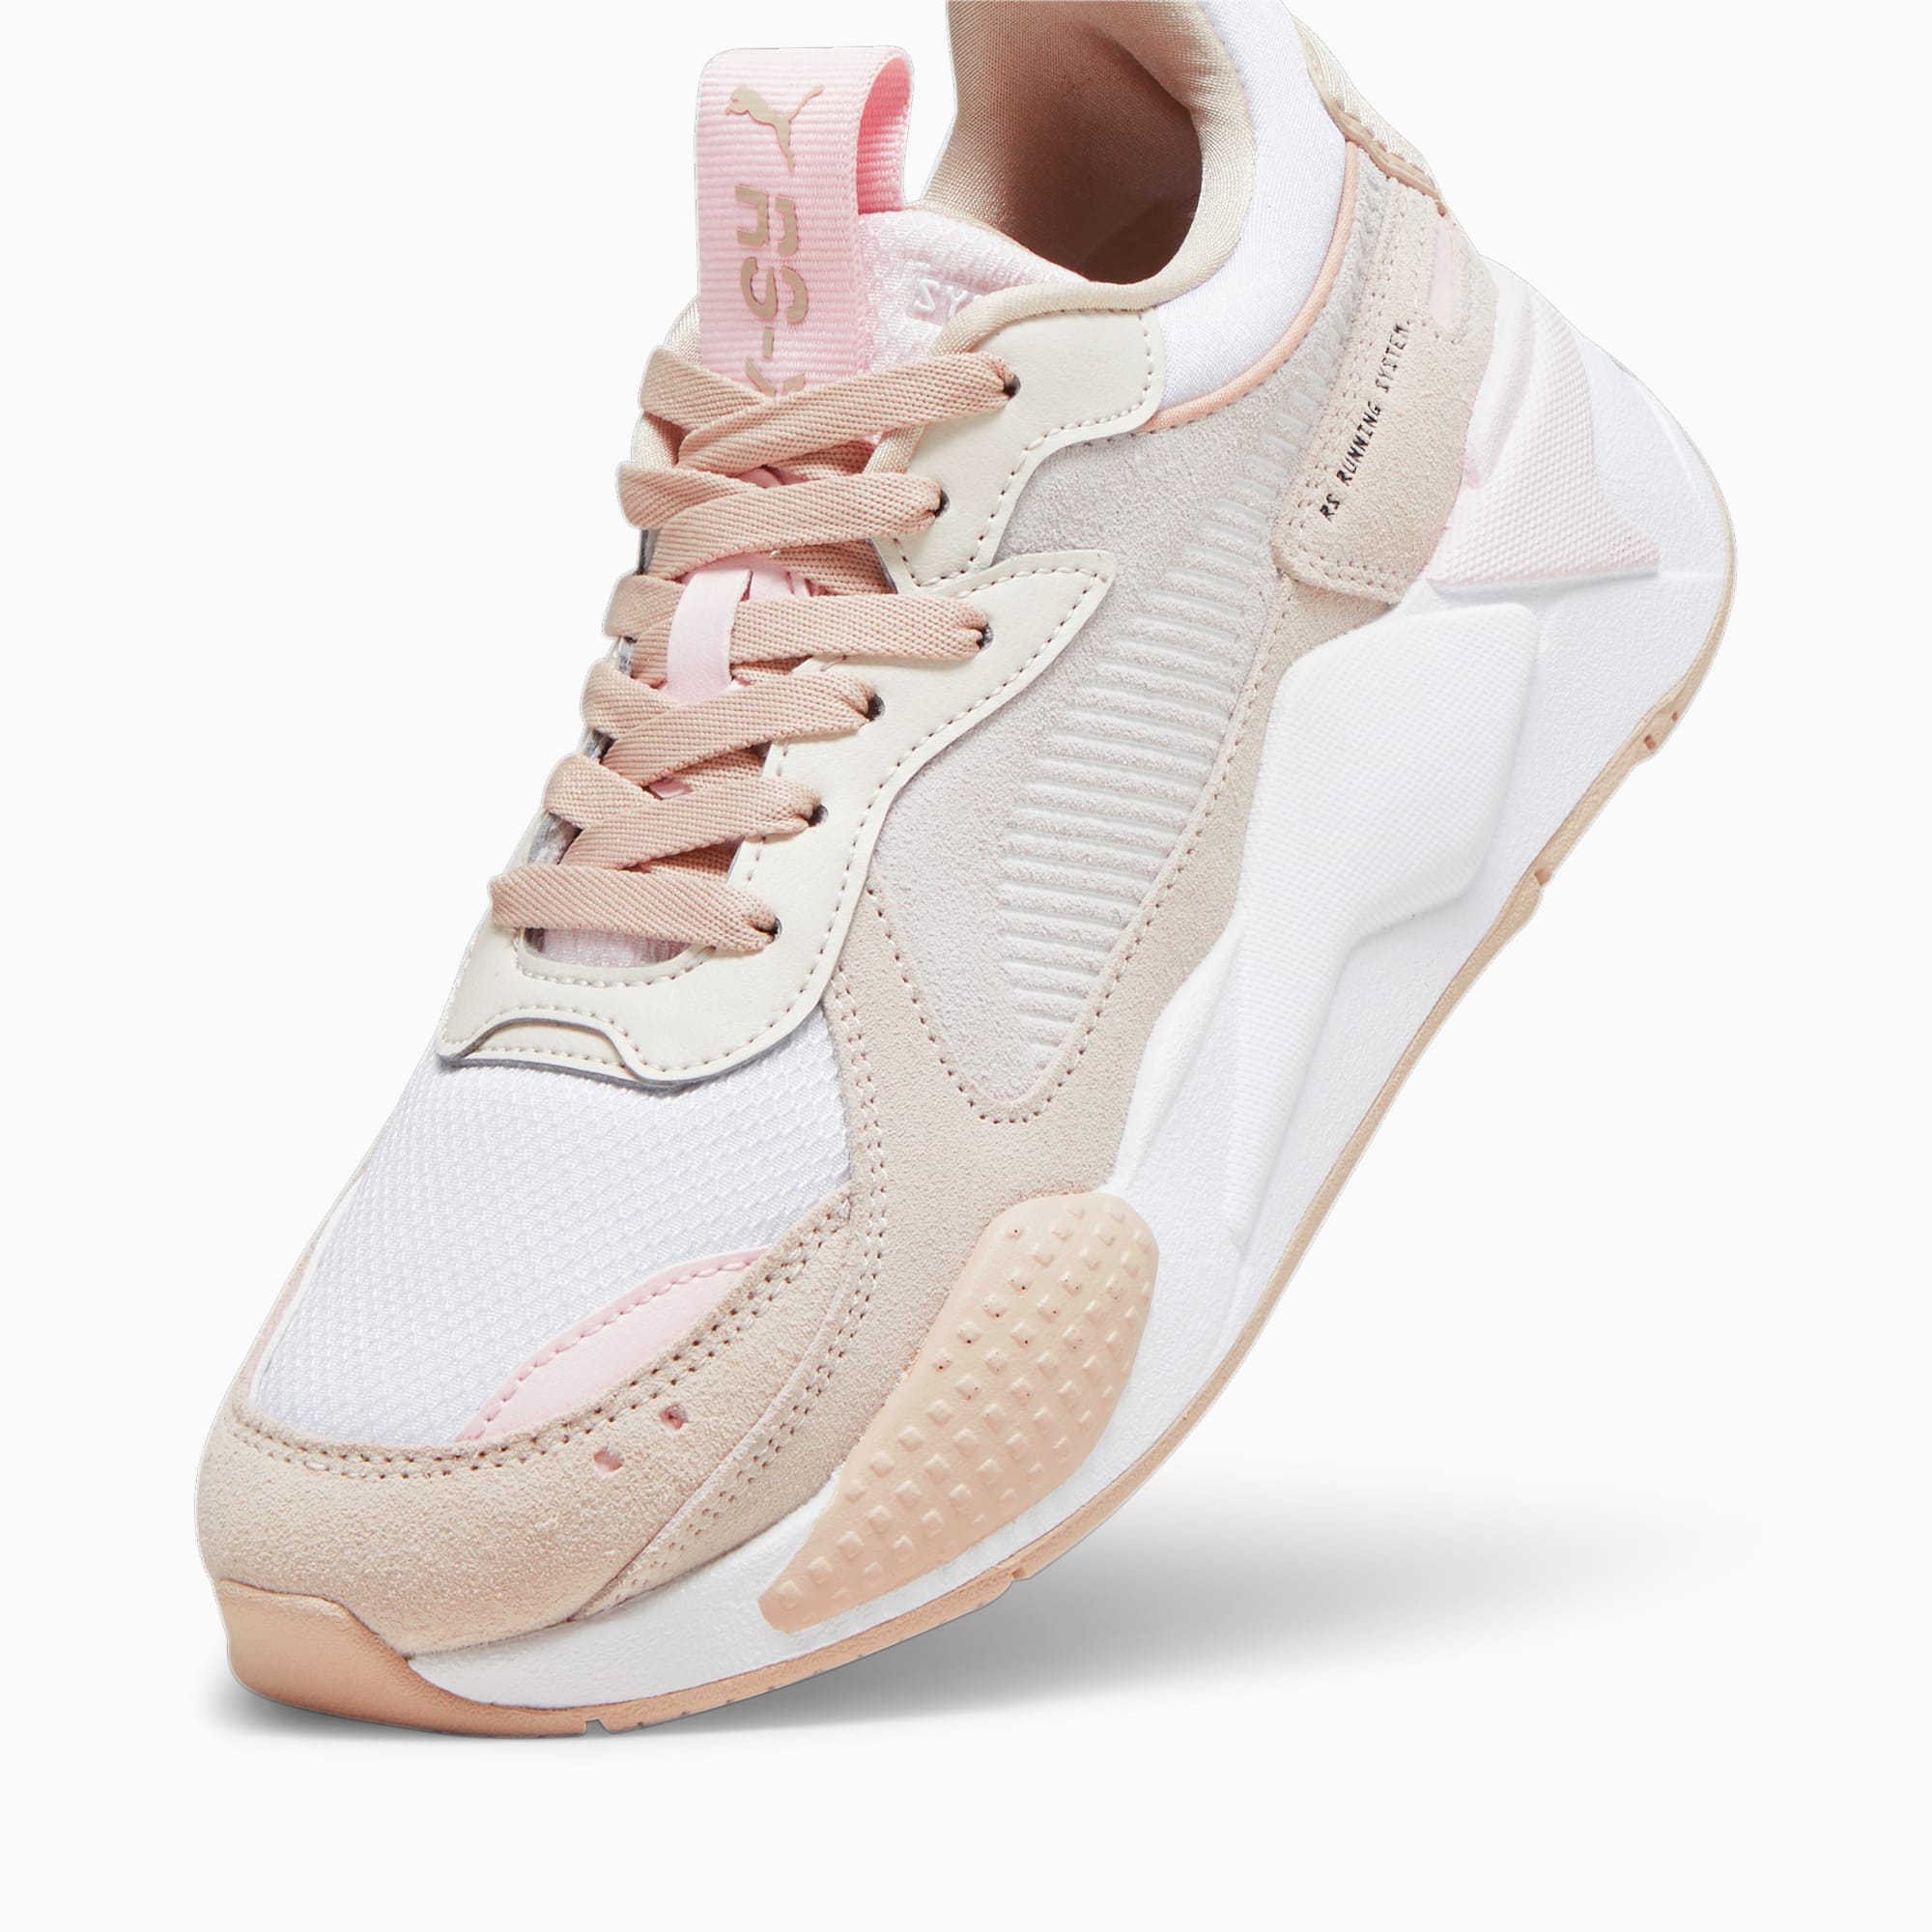 RS-X Reinvent Women's Sneakers PUMA